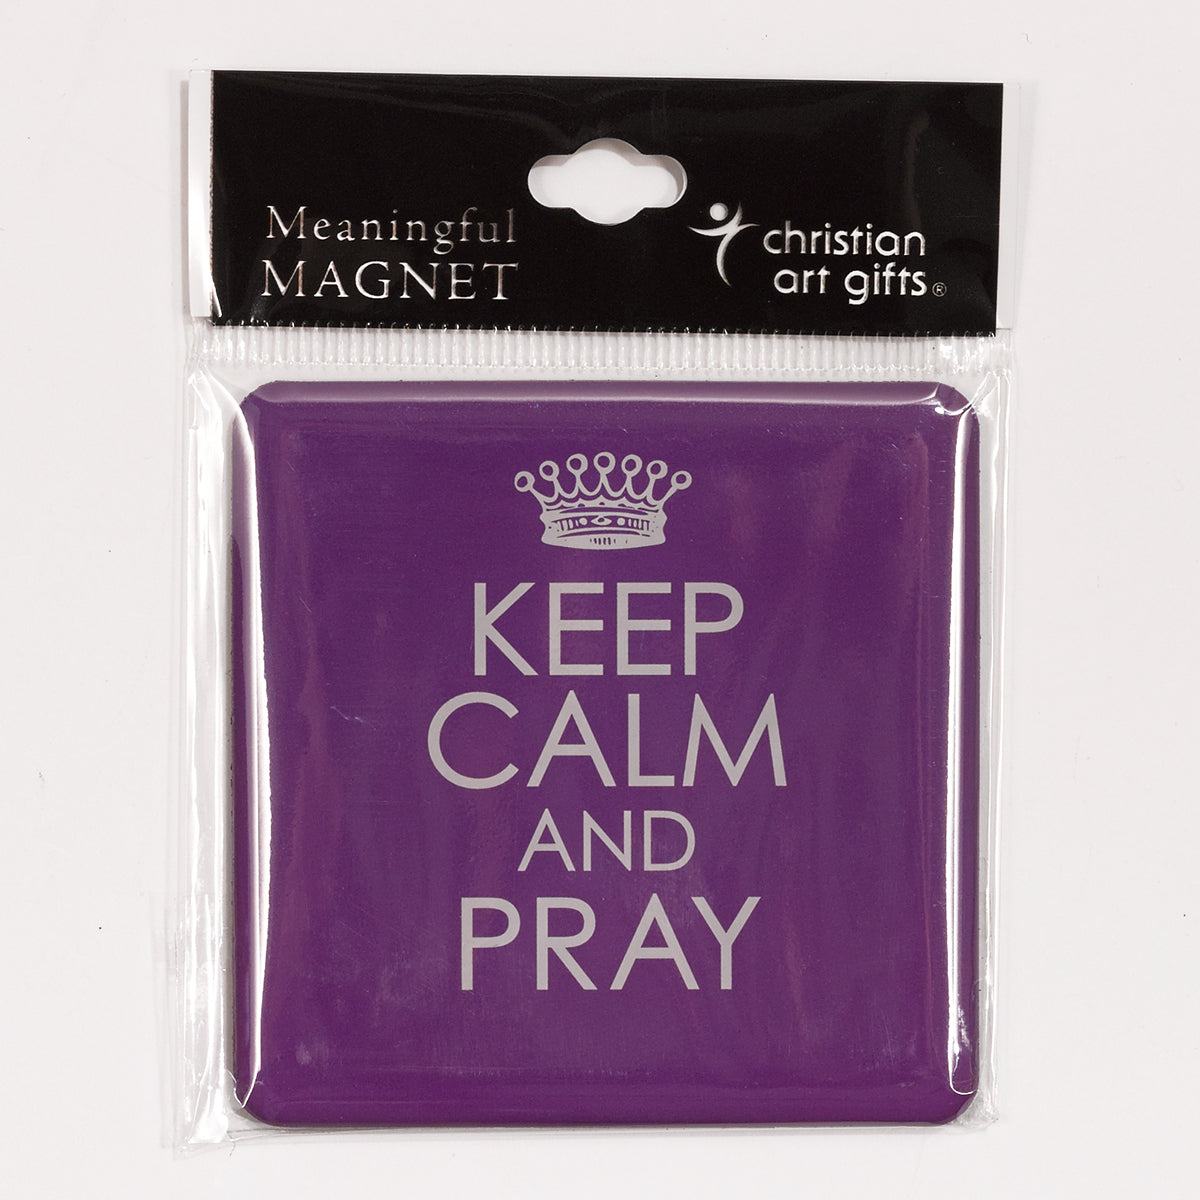 Image of Keep Calm and Pray Magnet other